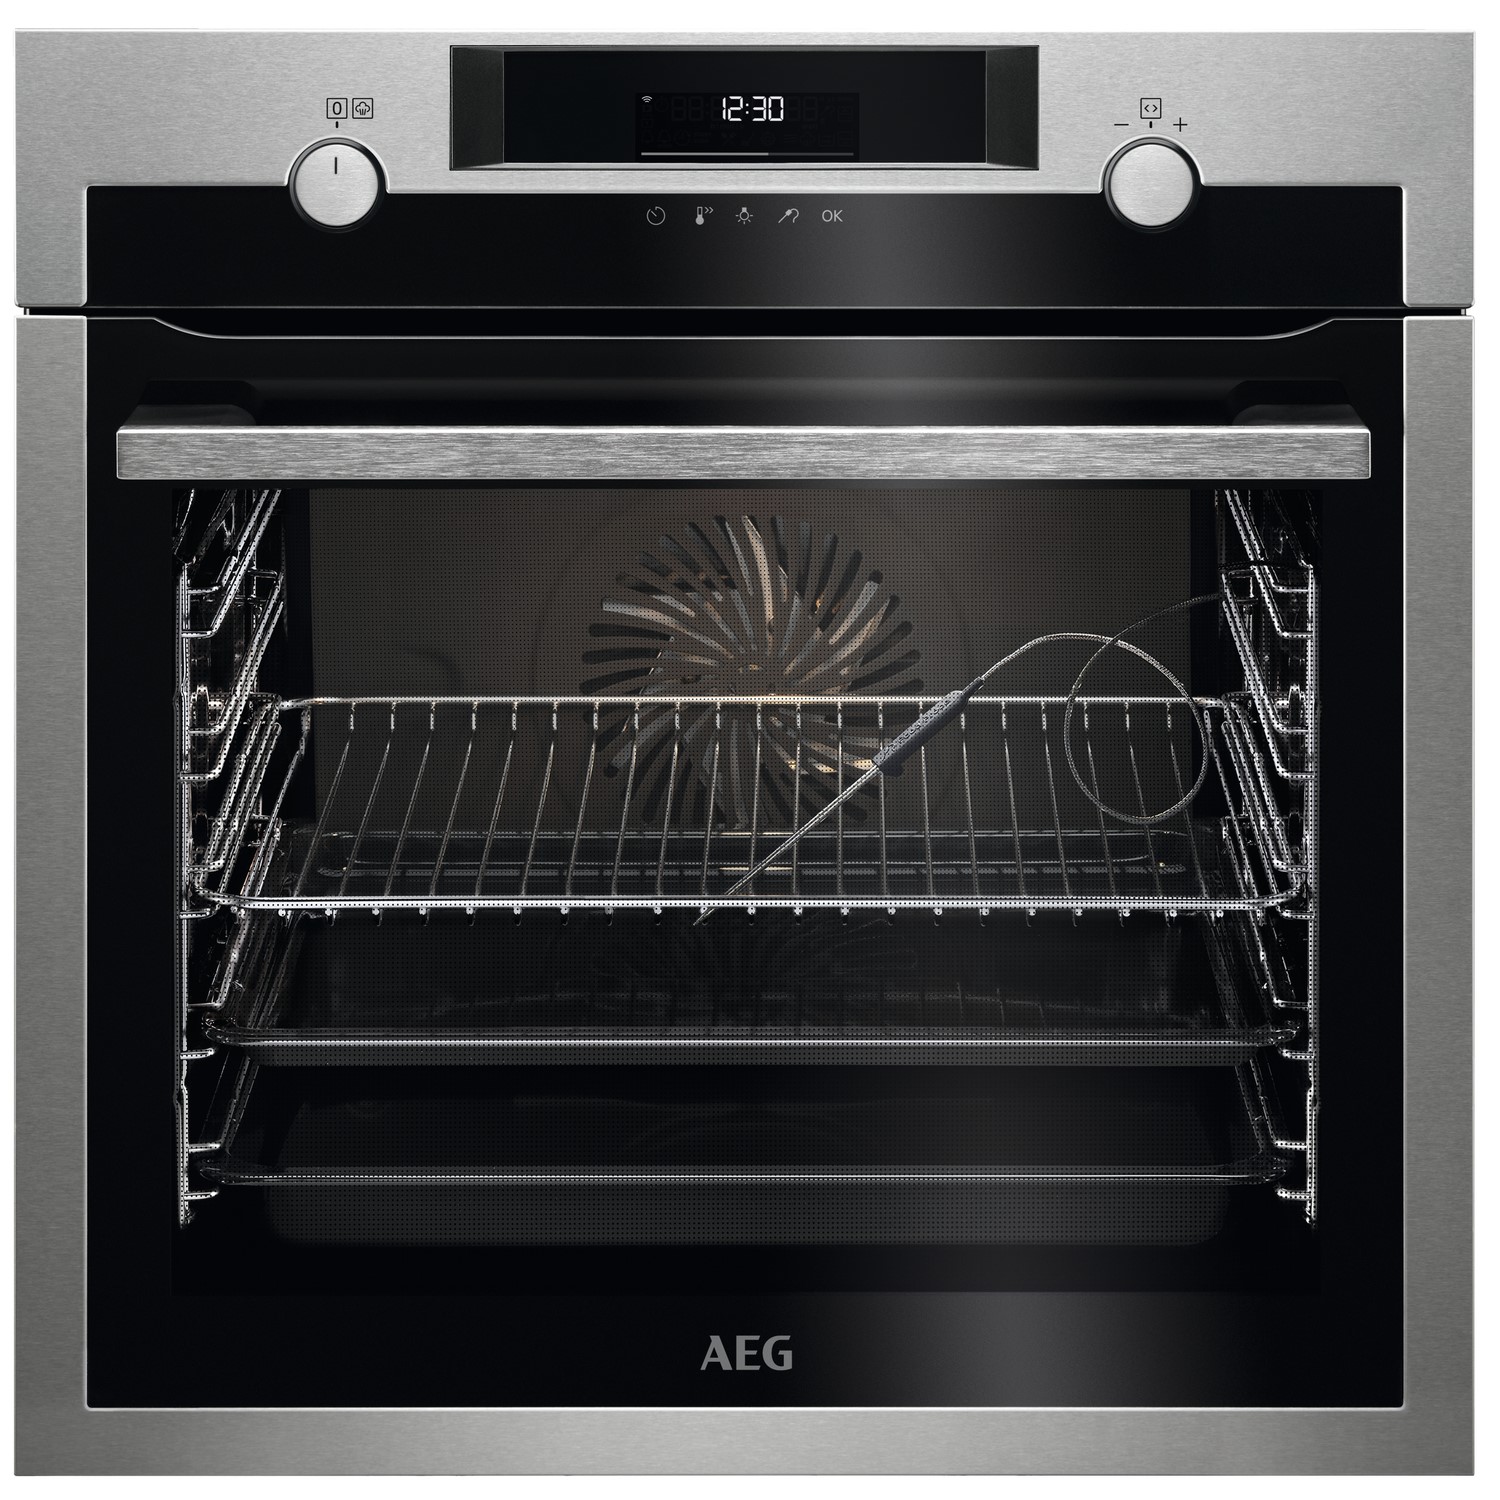 Refurbished AEG BCE558070M Single Built In Electric Oven Stainless Steel